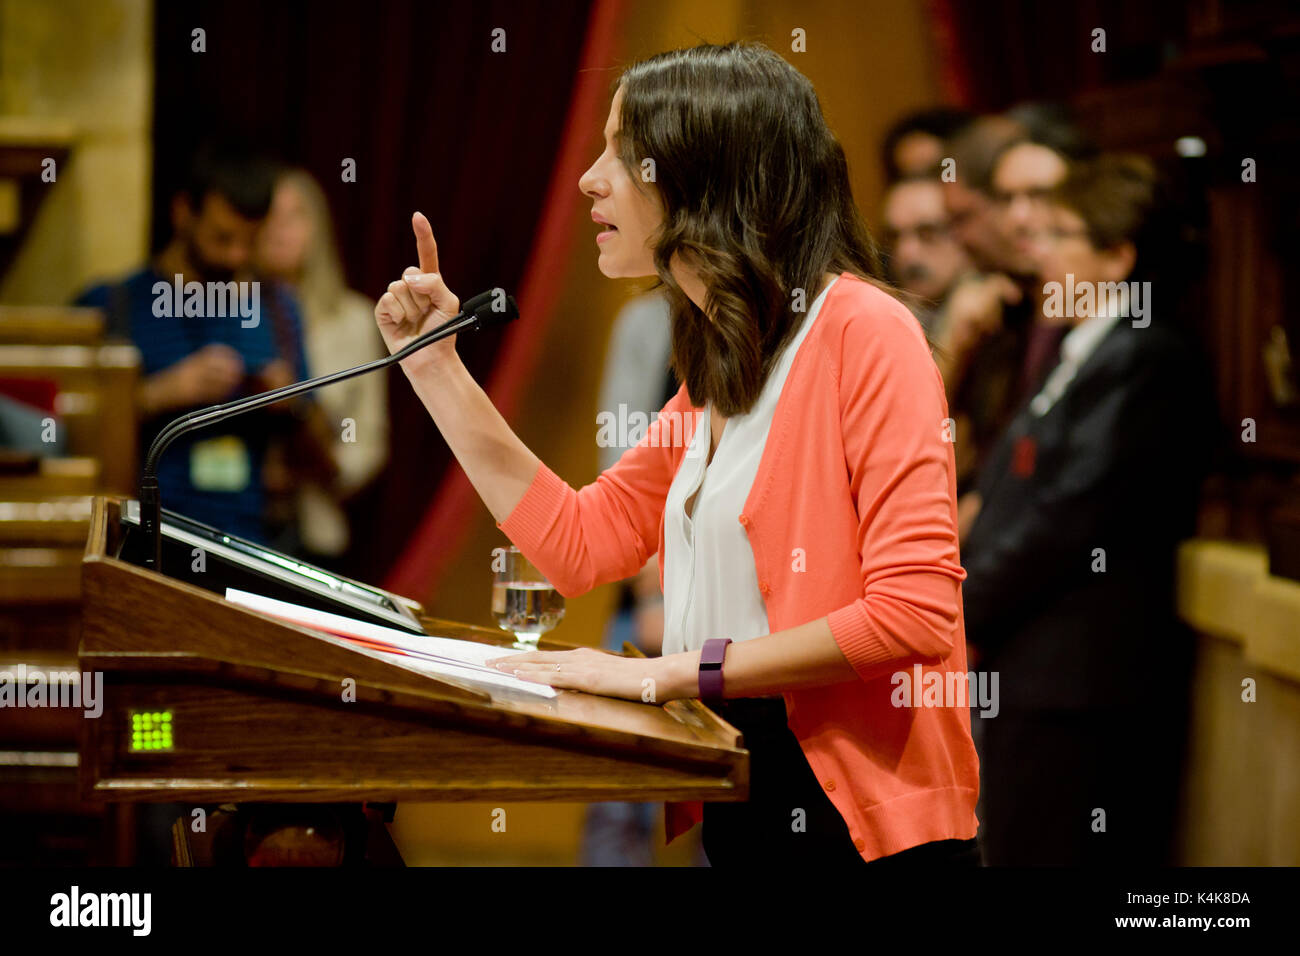 Barcelona, Spain. 06th Sep, 2017. September 6, 2017 - Barcelona, Catalonia, Spain - INES ARRIMADAS of party Ciutadans and leader of the opposition holds a speech during the parliamentary session in the Catalonia Parliament. T he Catalan Parliament has passed a law to call a referendum of independence the next first of October. The unionist forces of Catalonia and the Spanish government are frontally opposed to the referendum and consider it illegal. Credit: Jordi Boixareu/Alamy Live News Stock Photo